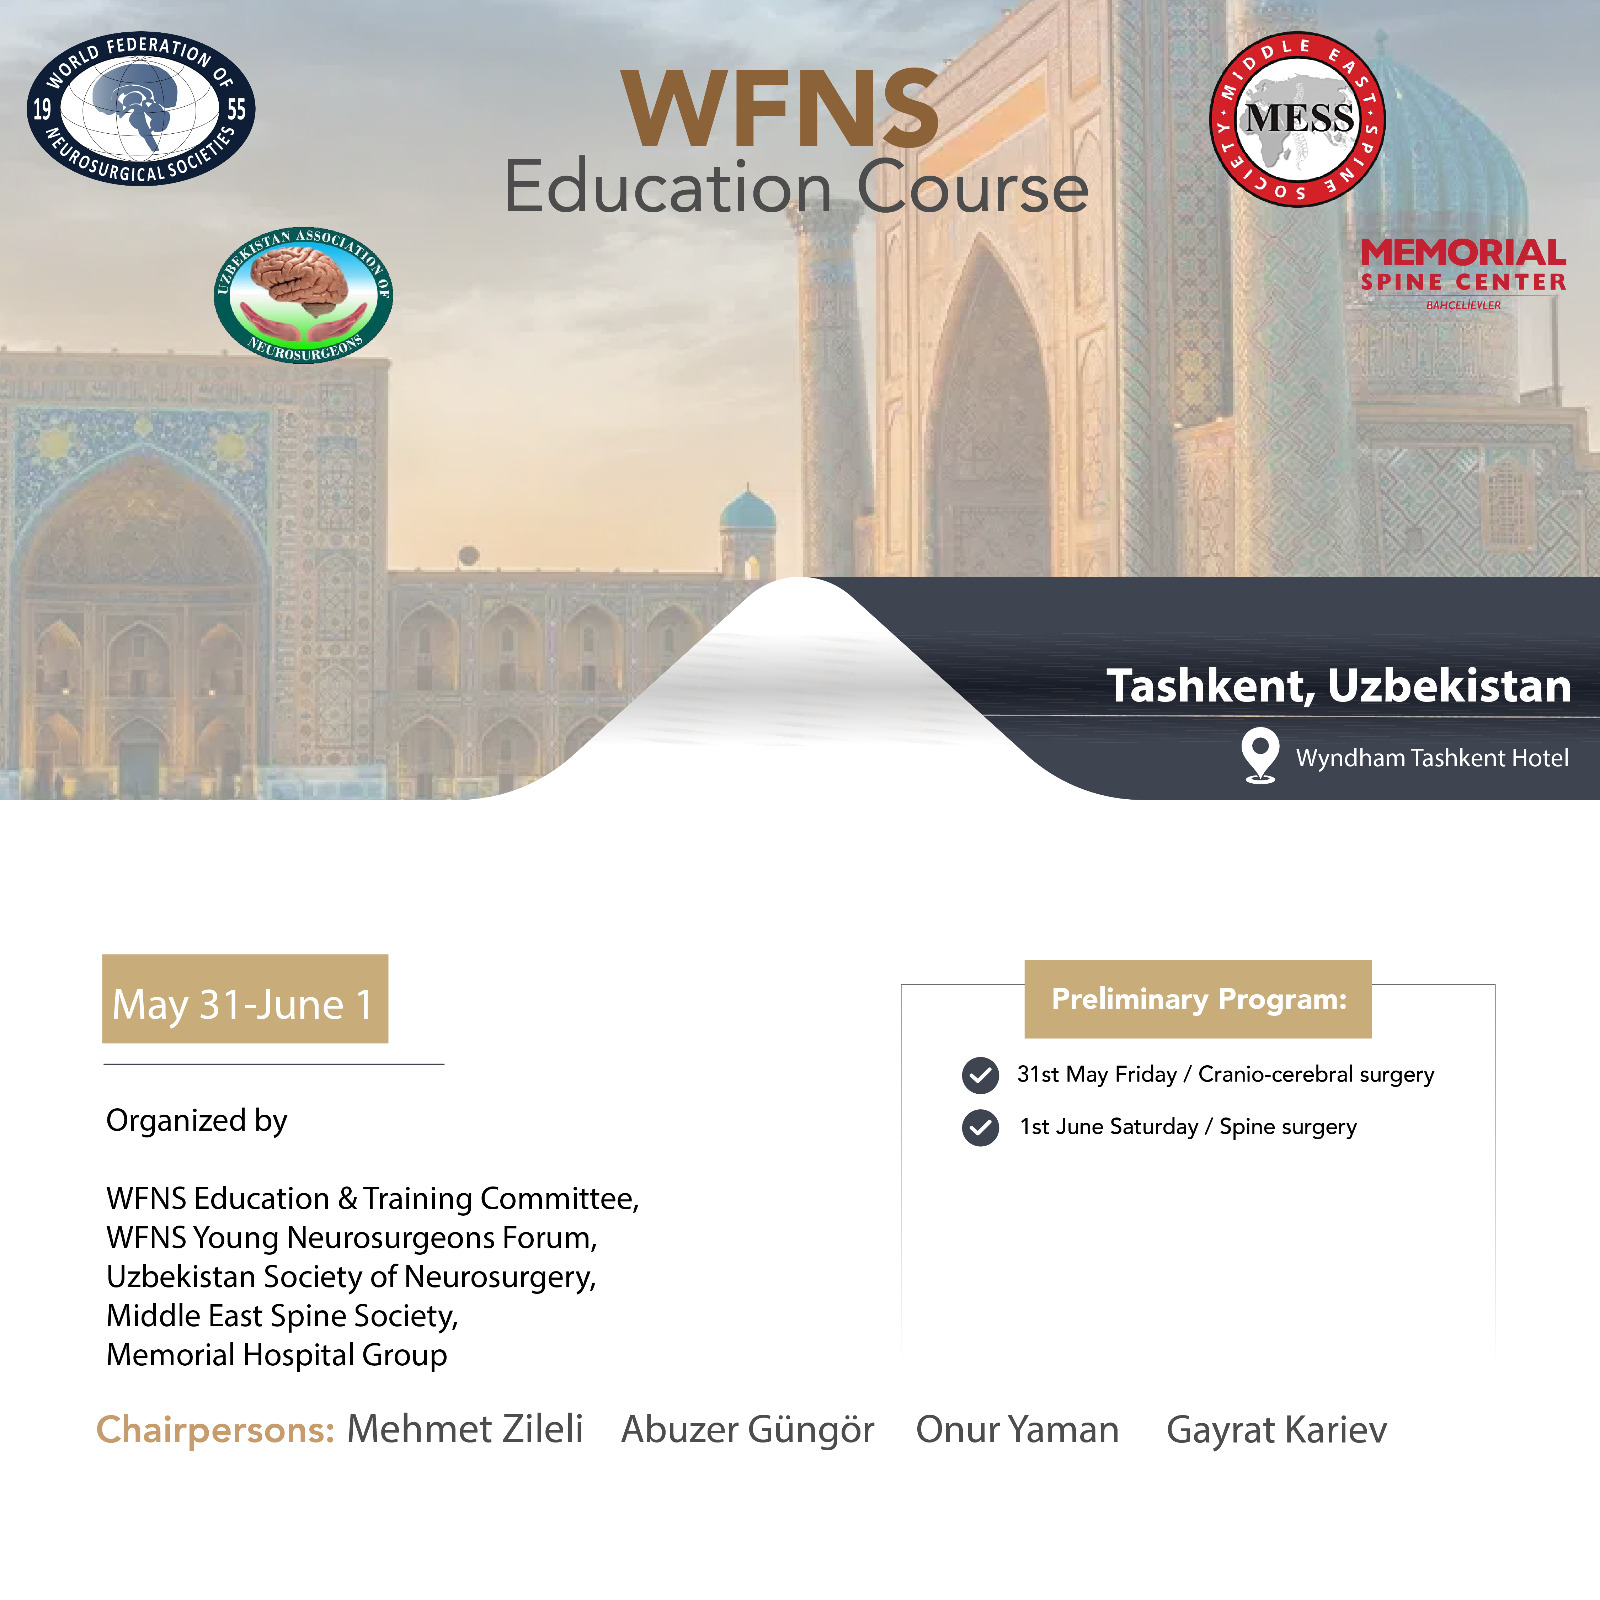 WFNS Education Course